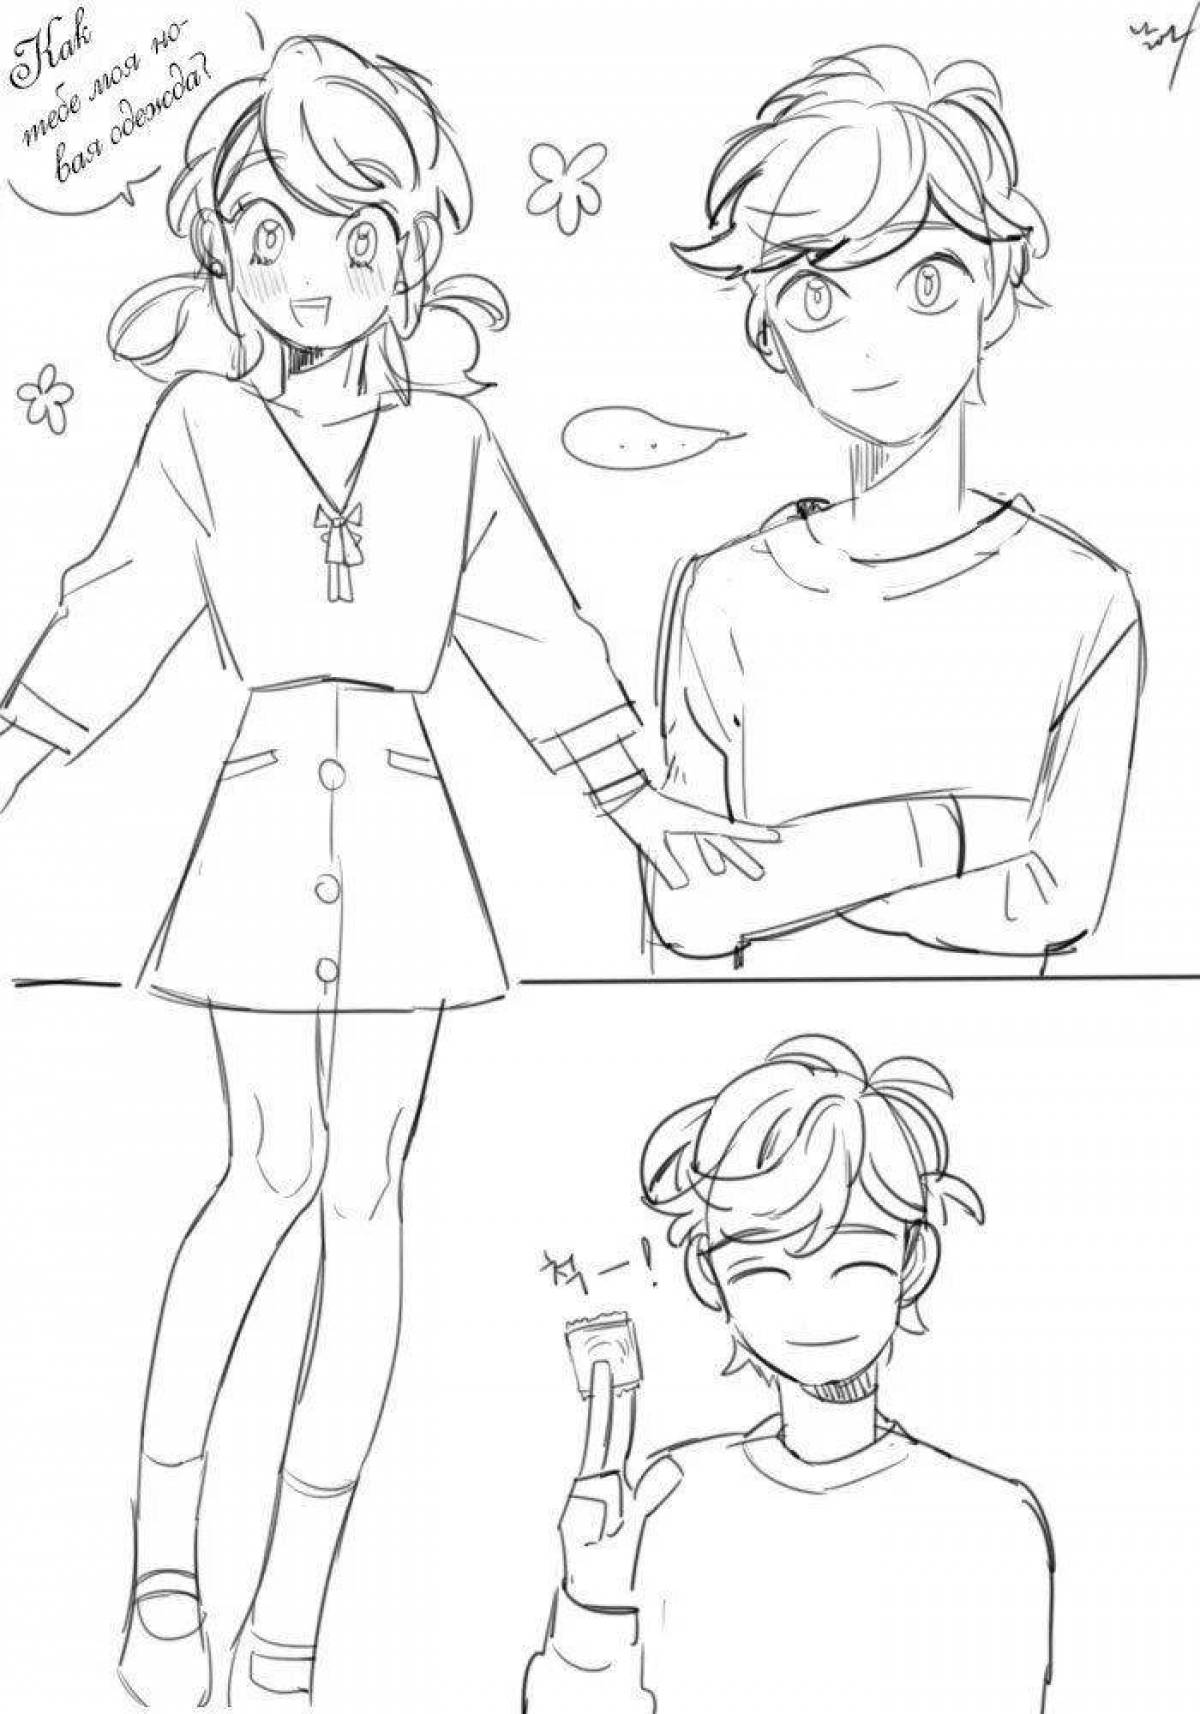 Coloring page adorable marinette and adrien